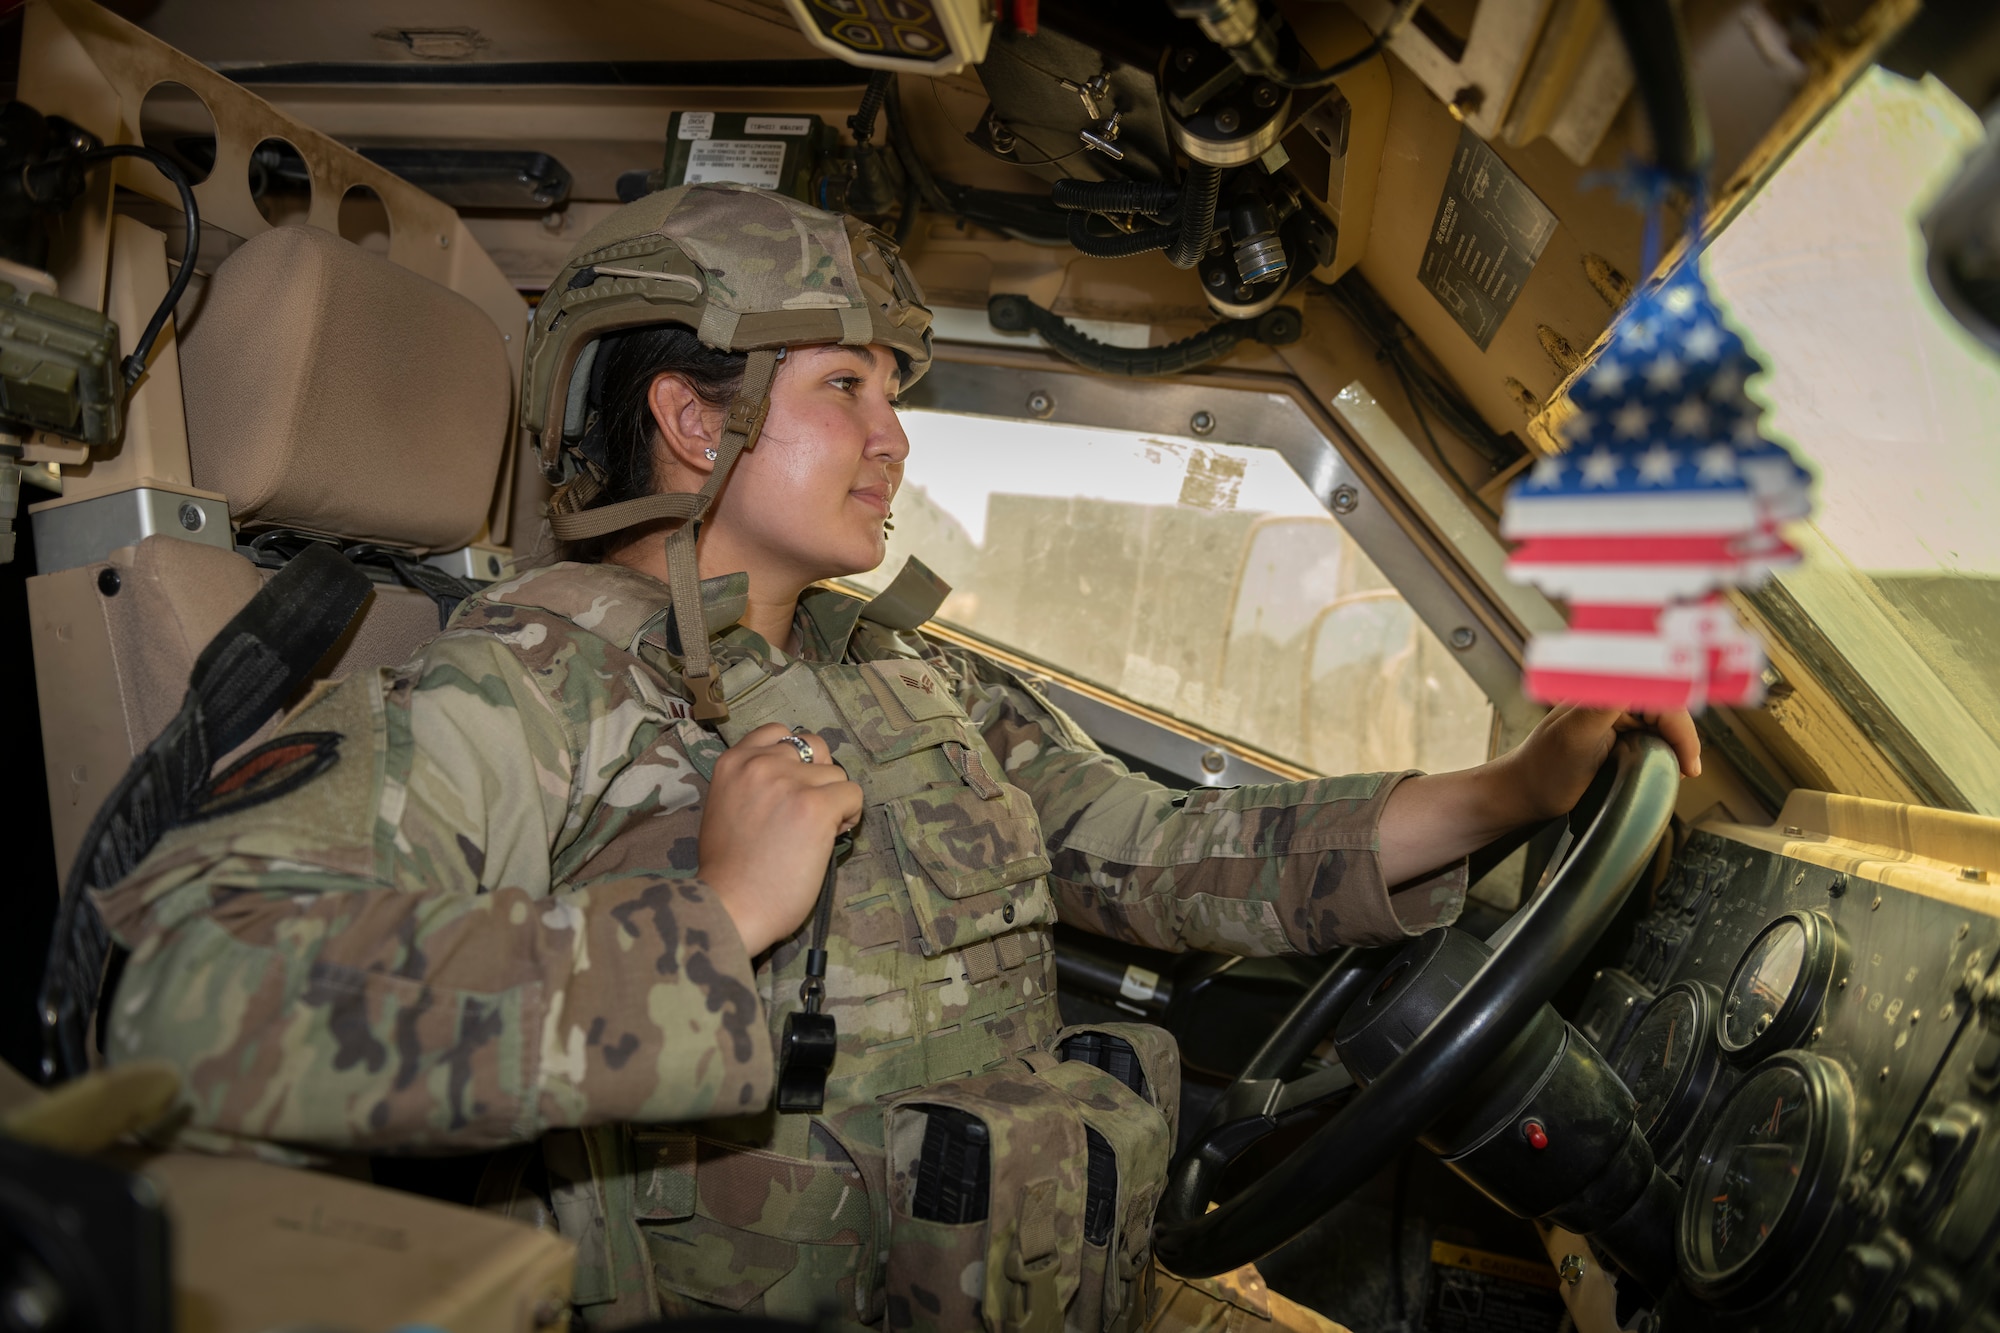 U.S. Air Force Senior Airman Lillianna Sanchez, 332nd Expeditionary Security Forces Squadron response force member, performs a perimeter check July 31, 2021, in an undisclosed location somewhere in Southwest Asia. The 332nd ESFS is tasked with providing force protection, ensuring operational readiness and protecting warfighting resources as well as its personnel. (U.S. Air Force photo by Senior Airman Cameron Otte)